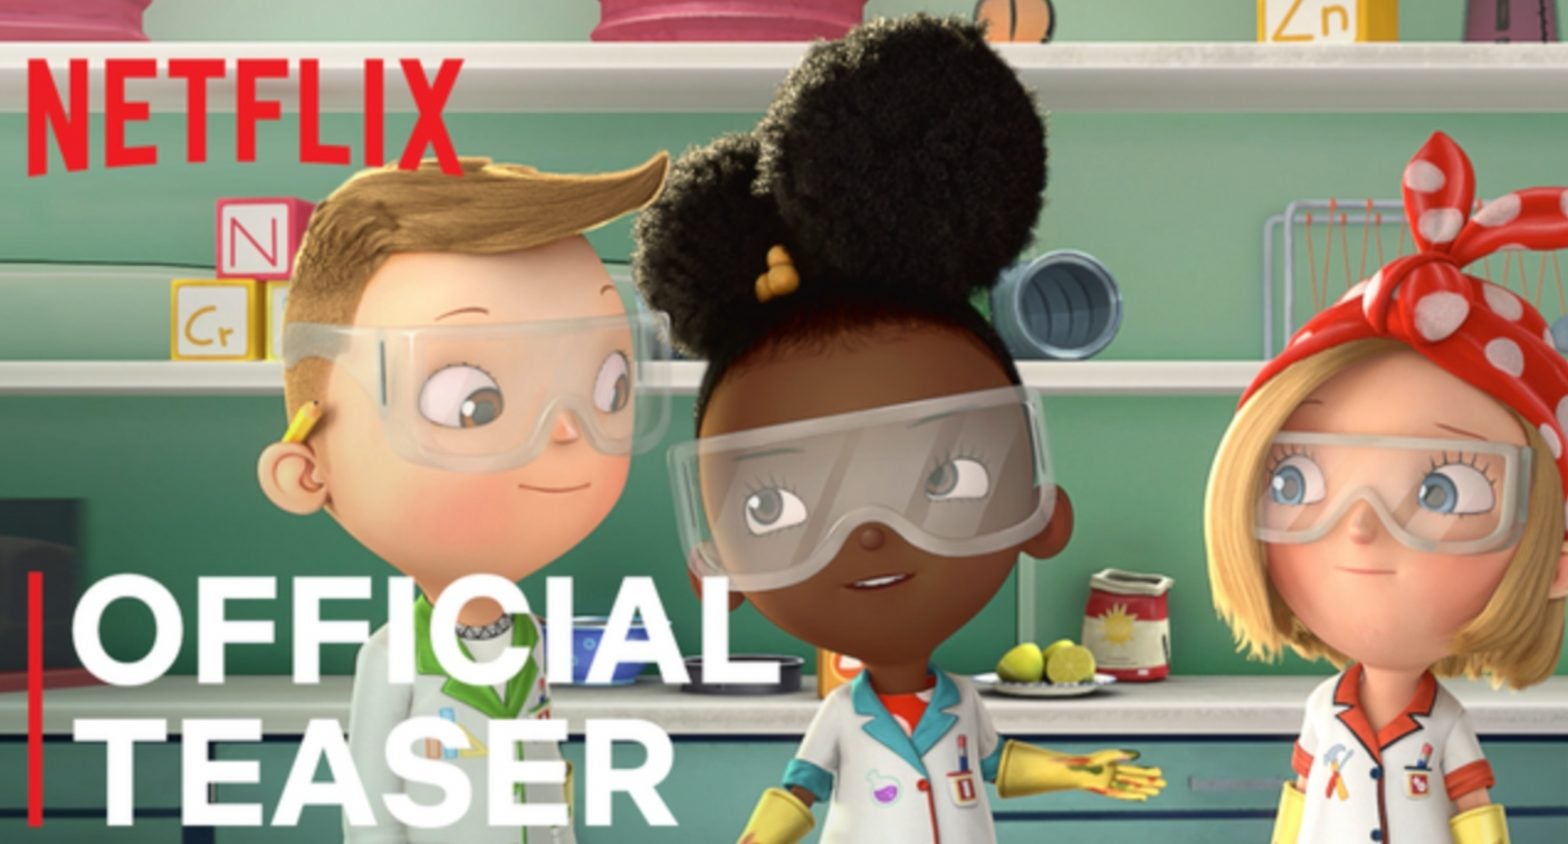 Get A First Look At Netflix's New Animated Series 'Ada Twist, Scientist,' Produced By The Obamas